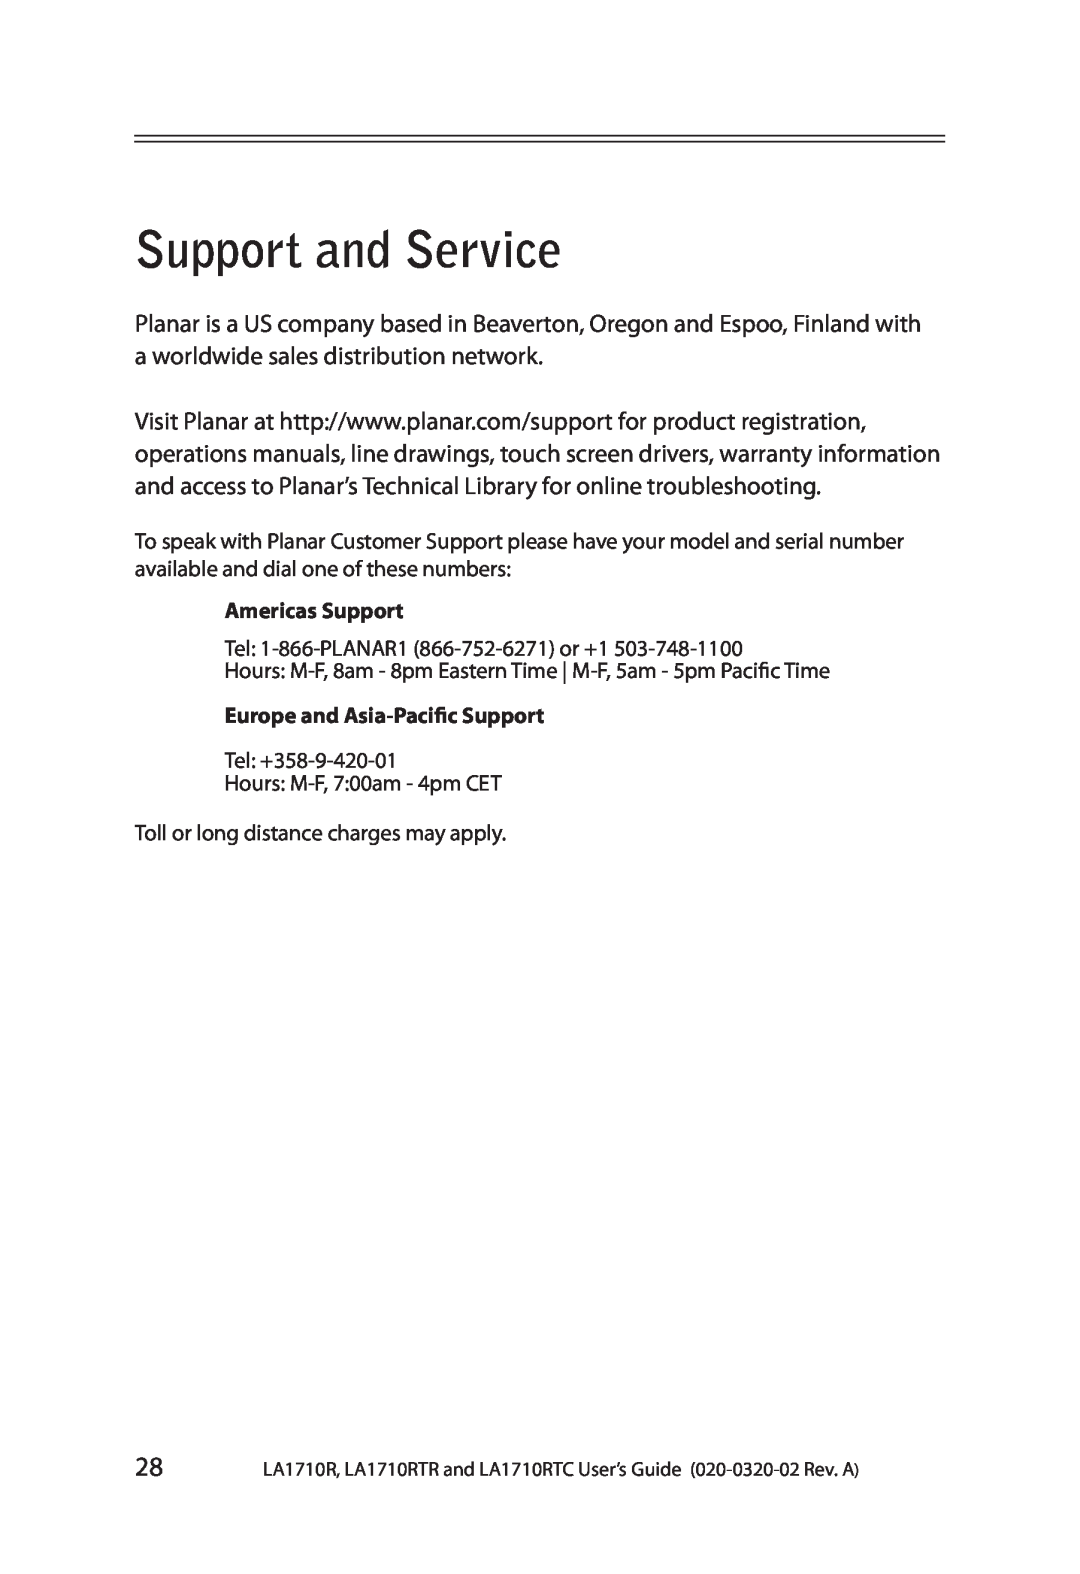 Planar LA1710RTR, LA1710RTC manual Support and Service, Americas Support, Europe and Asia-Pacific Support 